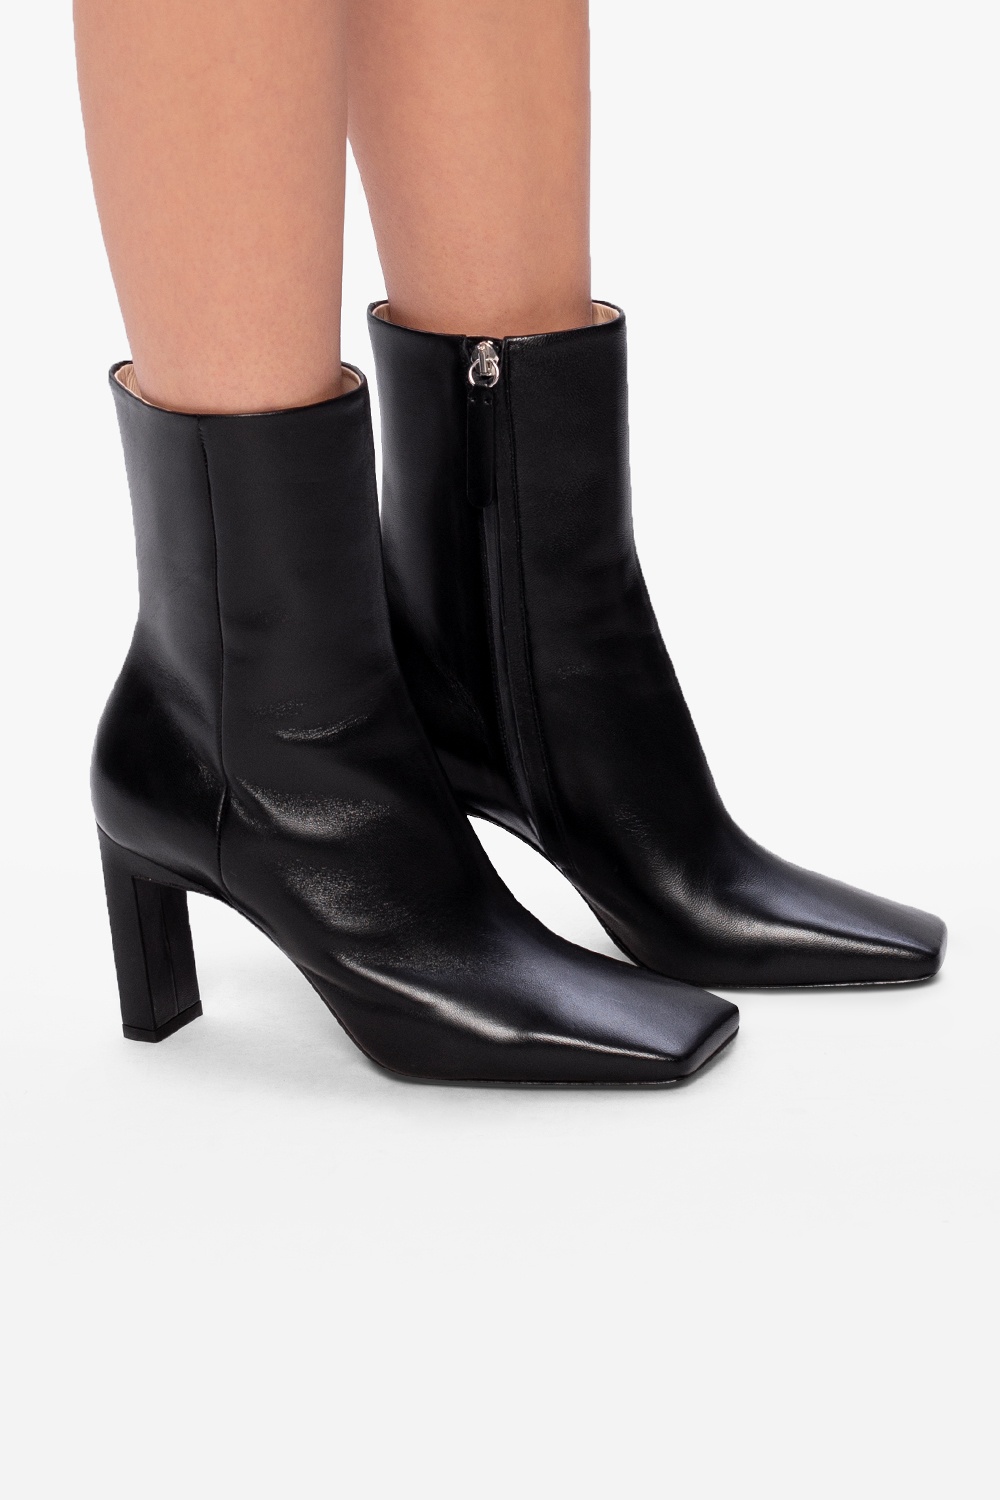 Wandler 'Isa' heeled ankle boots | Women's Shoes | IetpShops